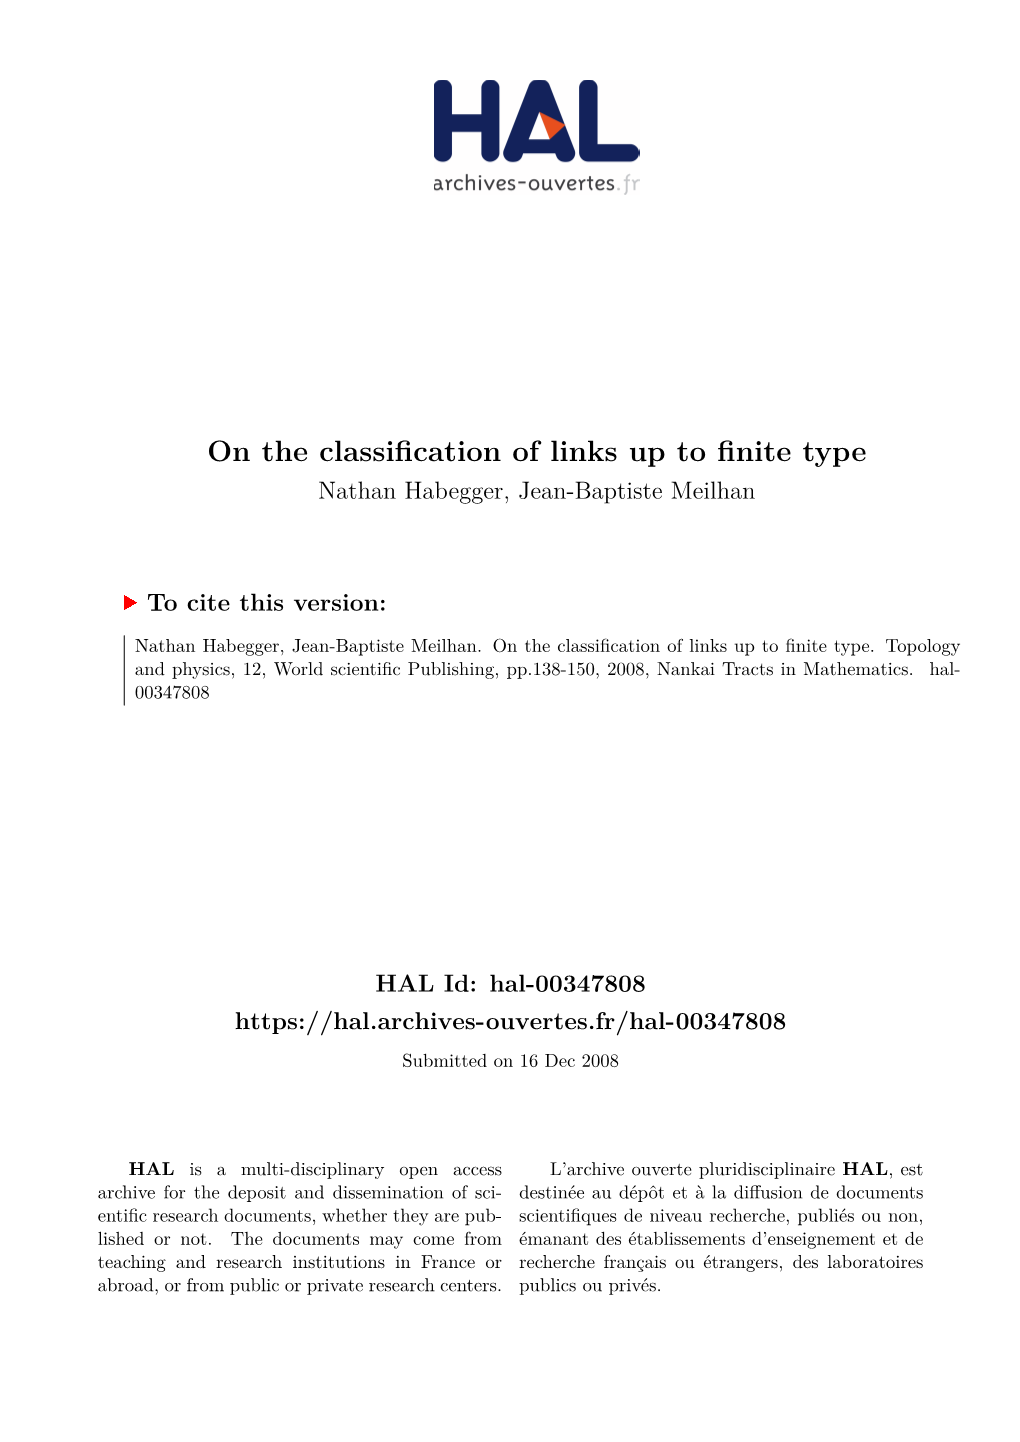 On the Classification of Links up to Finite Type Nathan Habegger, Jean-Baptiste Meilhan